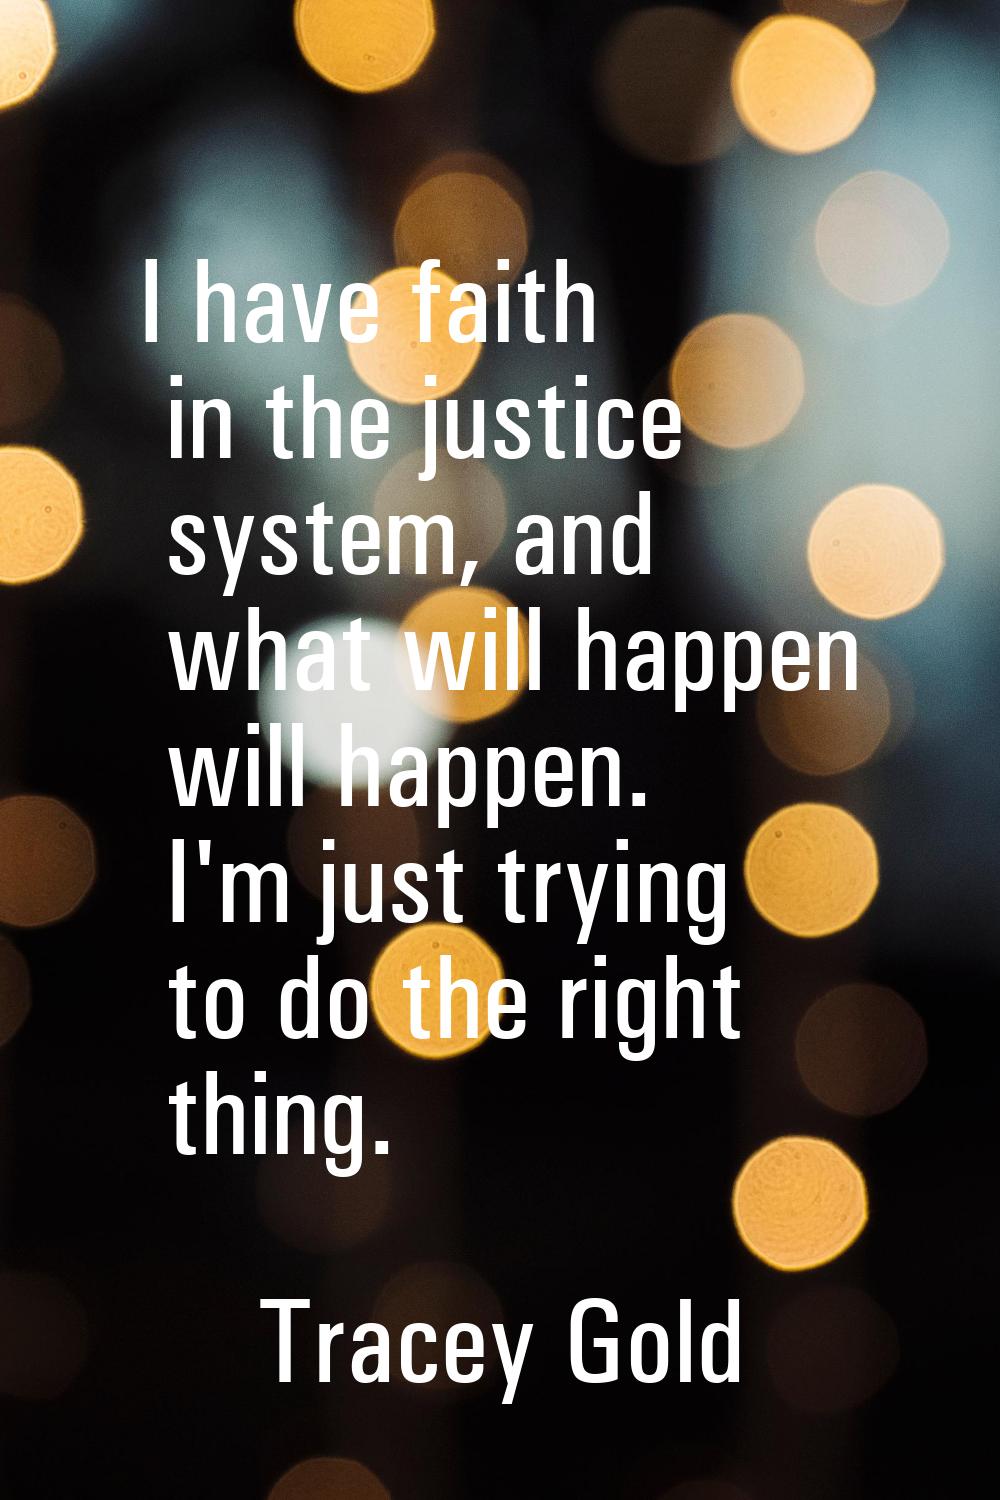 I have faith in the justice system, and what will happen will happen. I'm just trying to do the rig